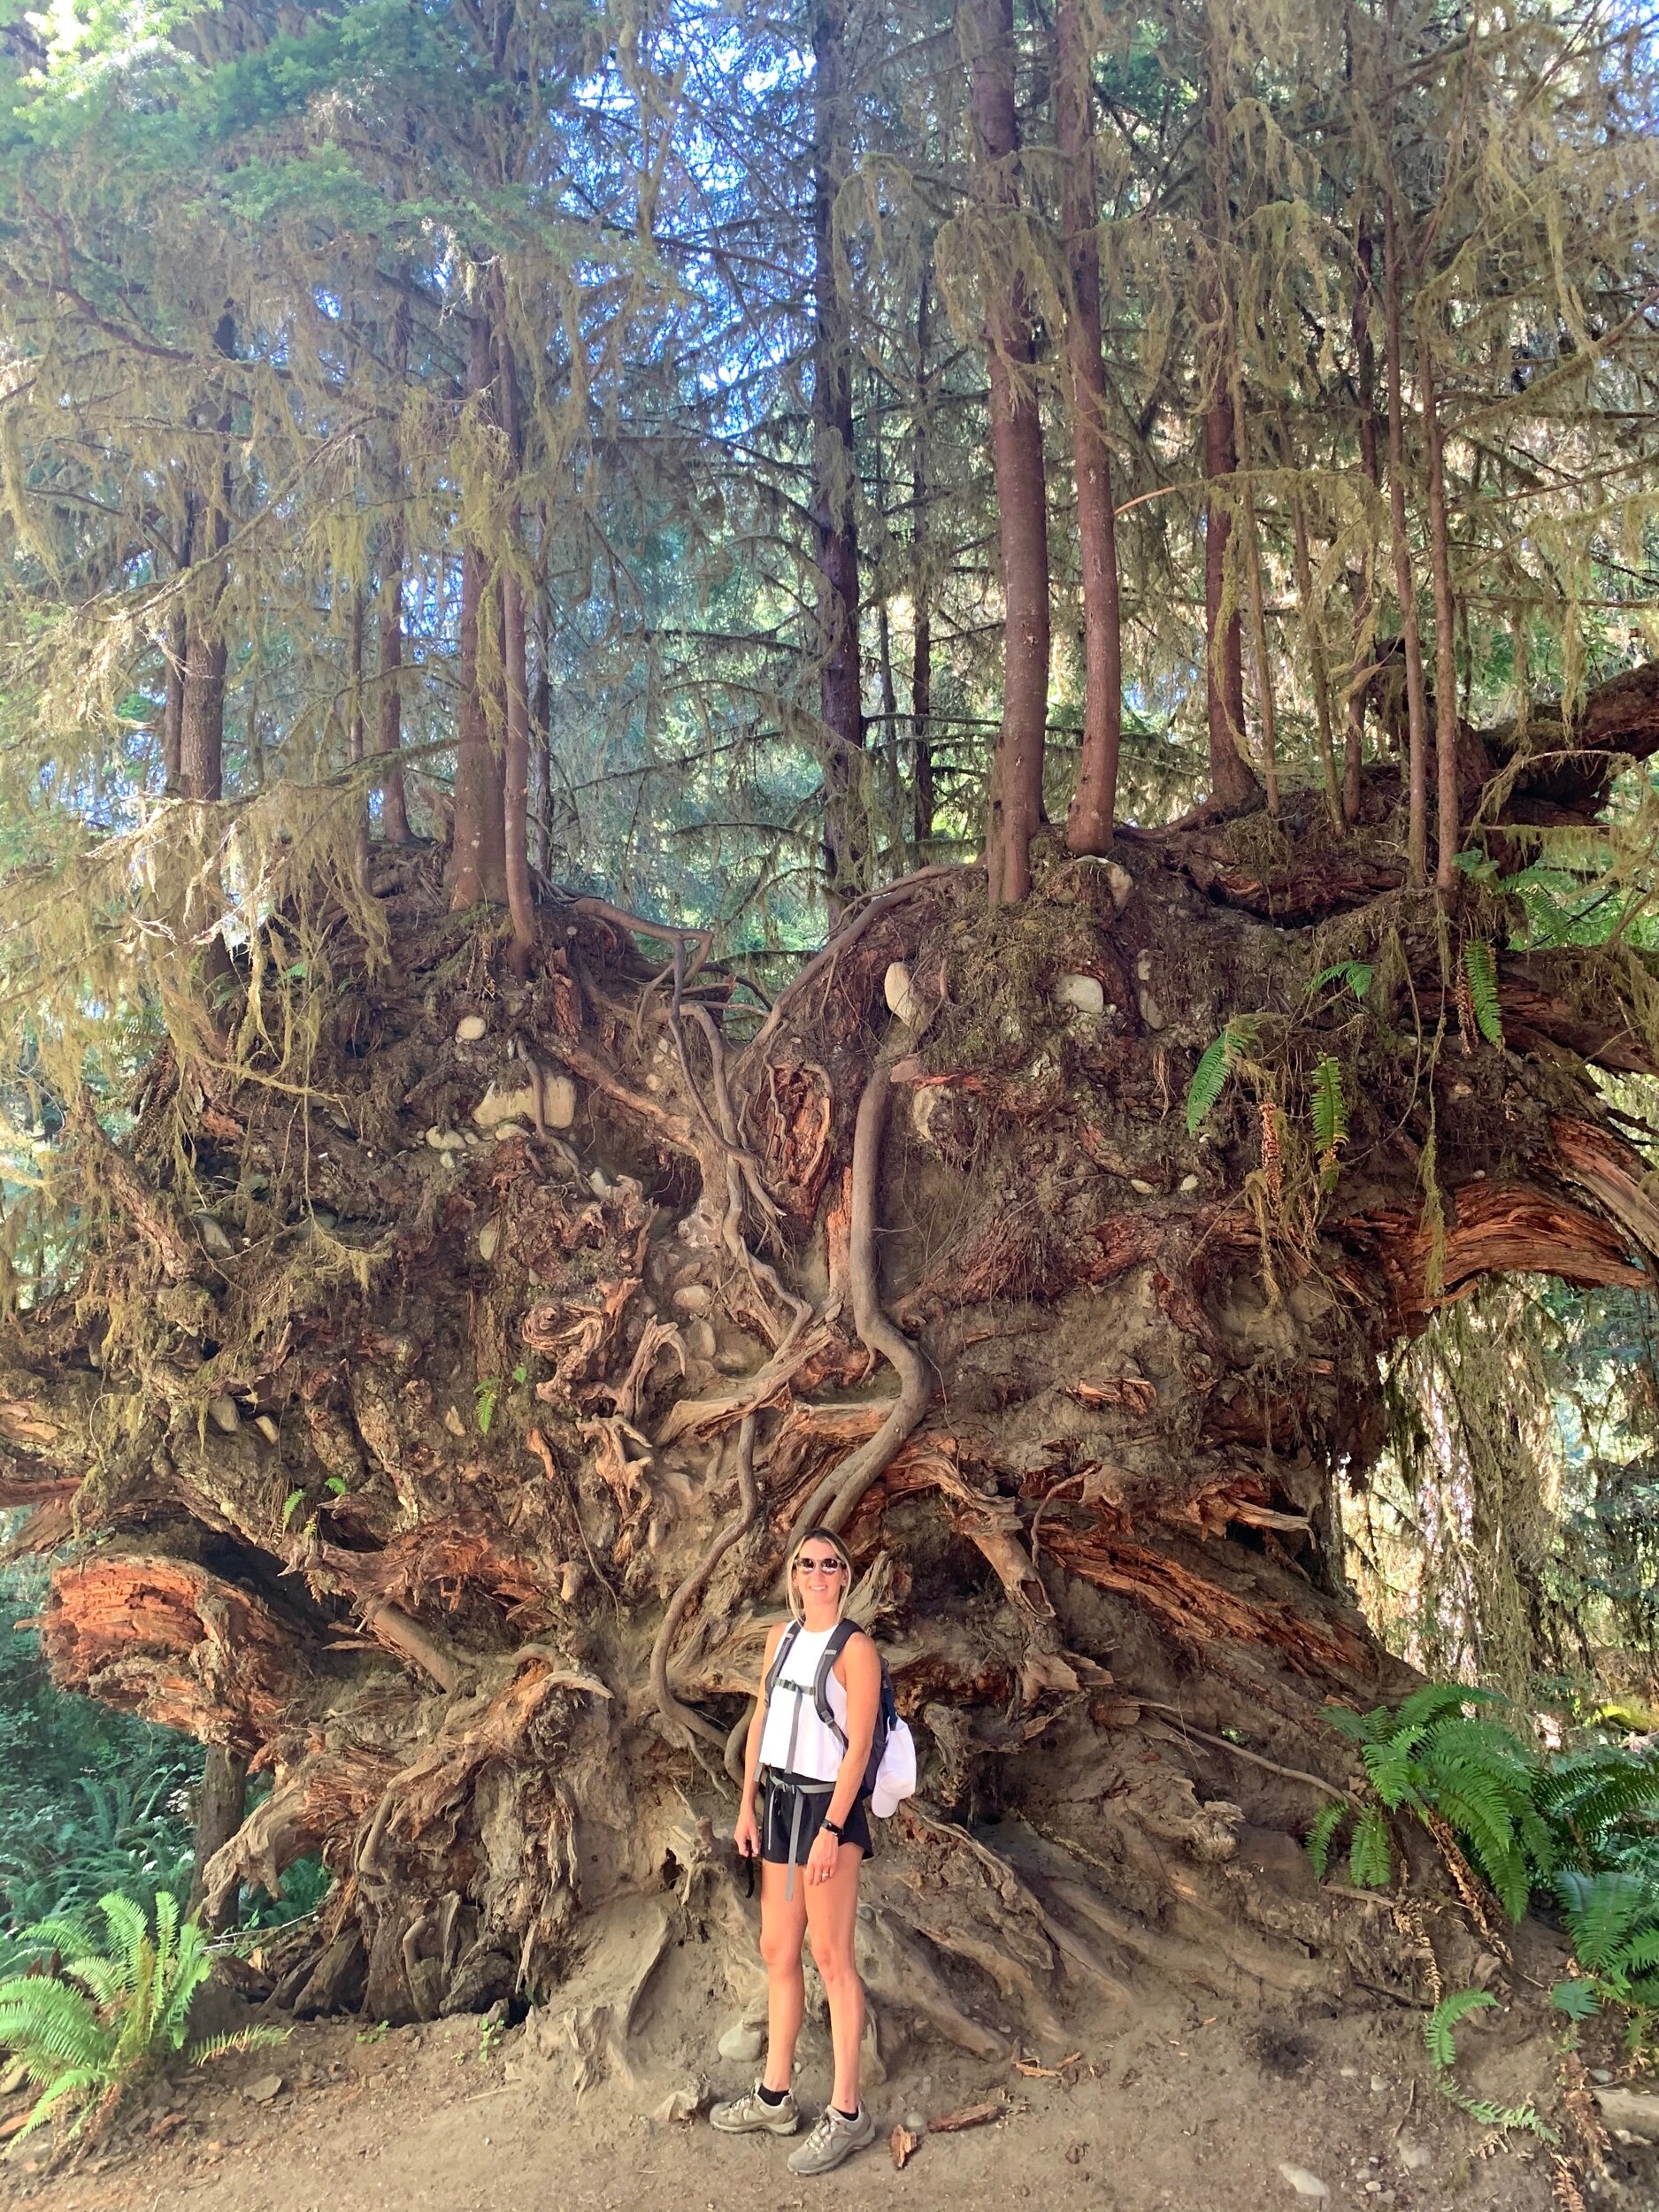  Quite an impressive root system on this fallen tree in the  Hoh Rain Forest  in Olympic National Park. Notice the many trees growing out of the exposed roots. 